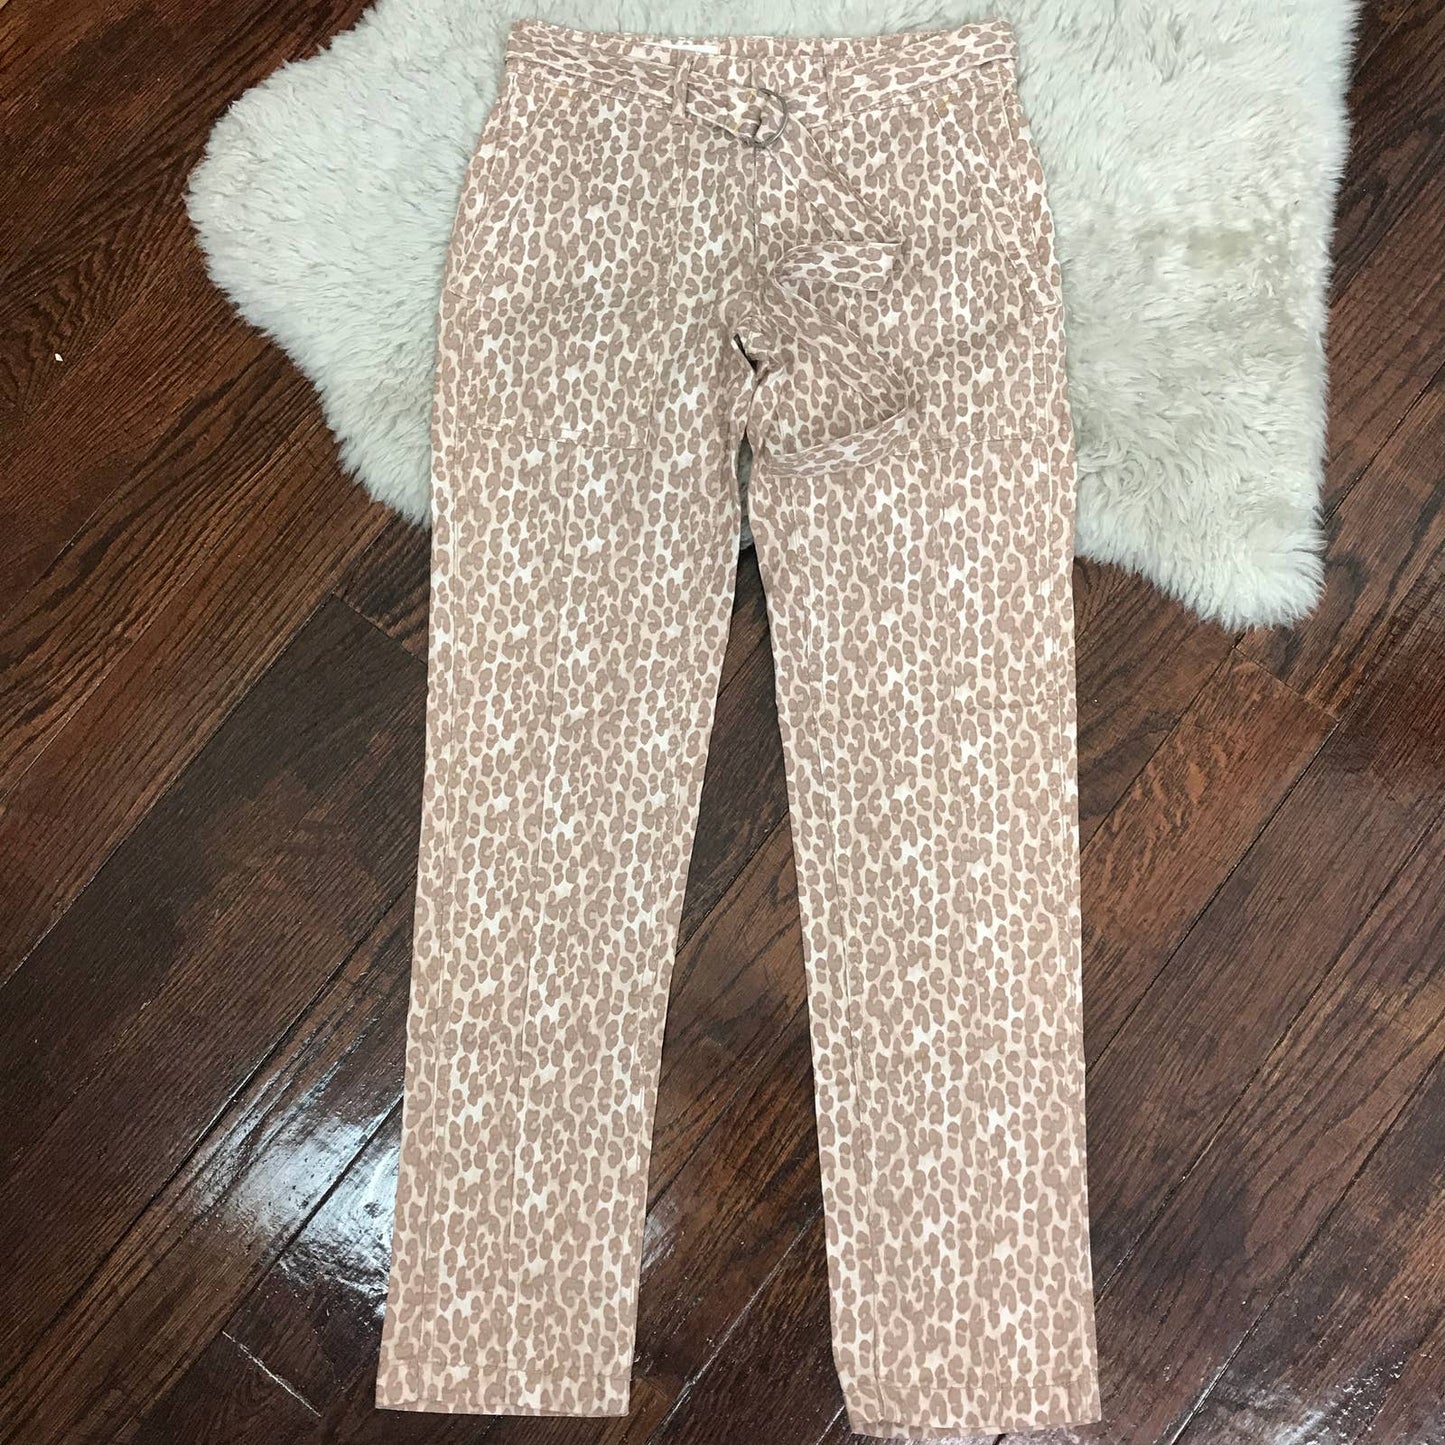 Anthropologie Leopard Belted Cargo Pants Size 24 The Wanderer Animal Print Tan